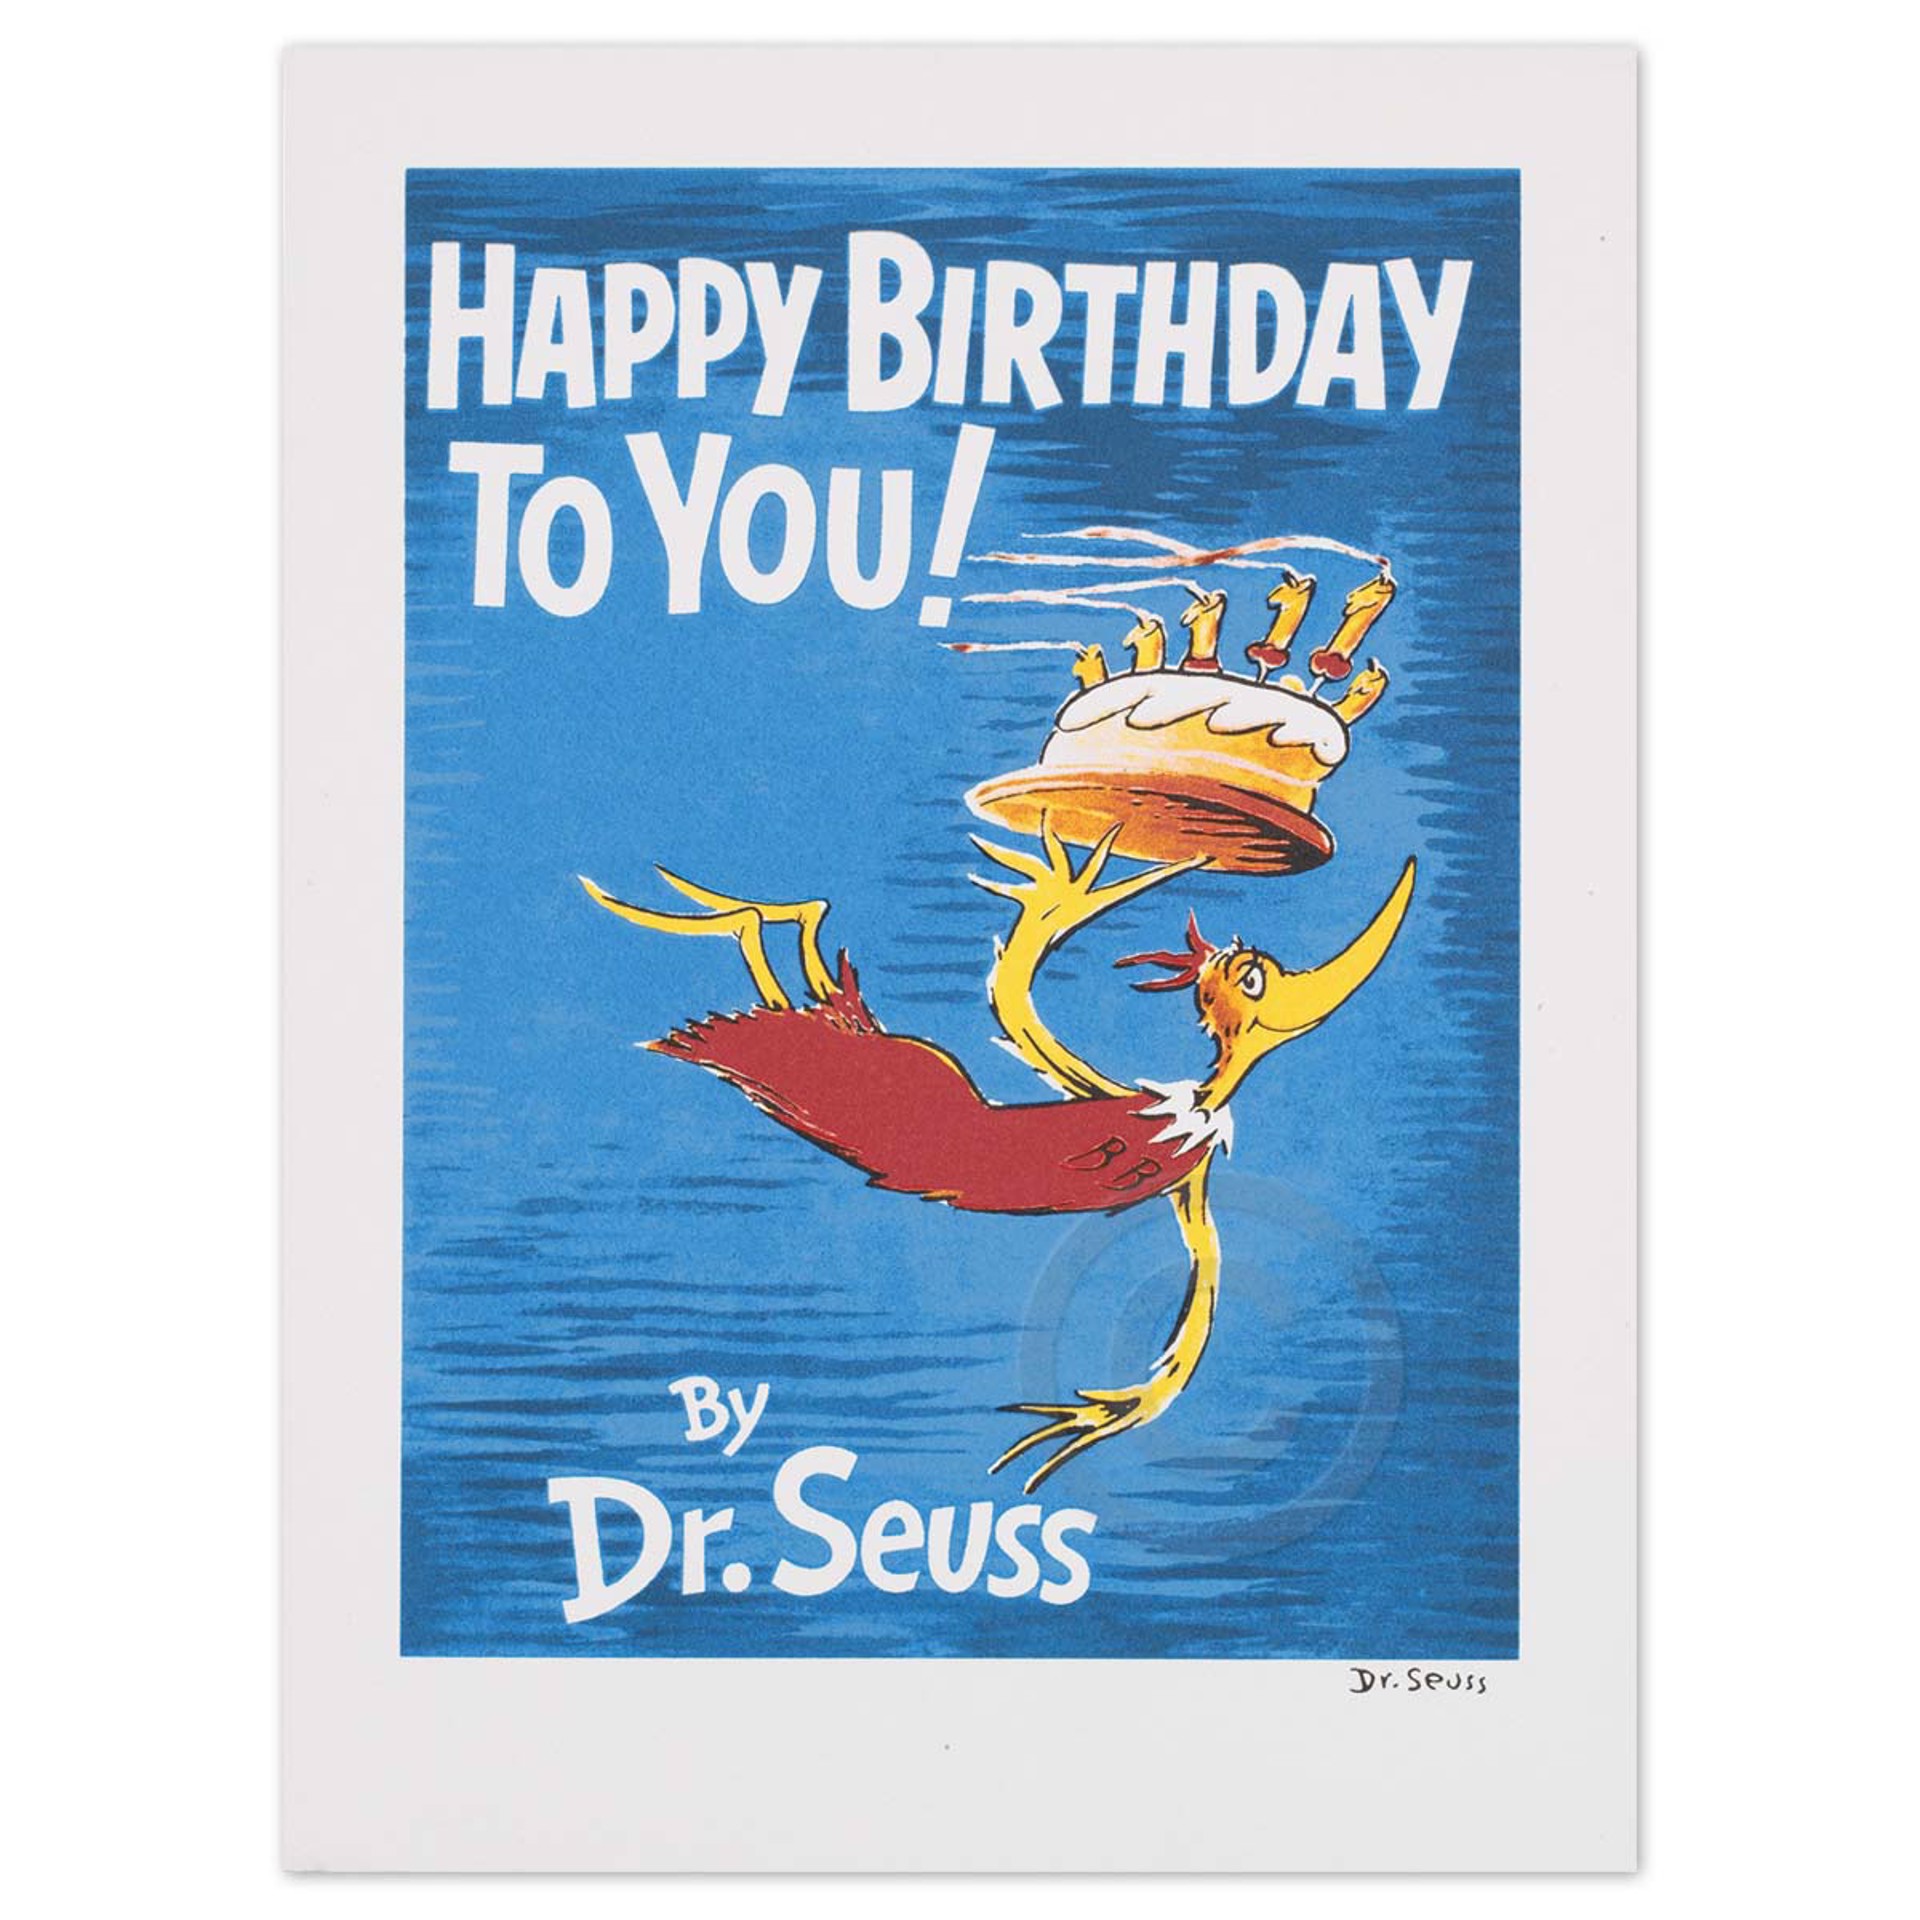 Happy Birthday To You! by Dr. Seuss